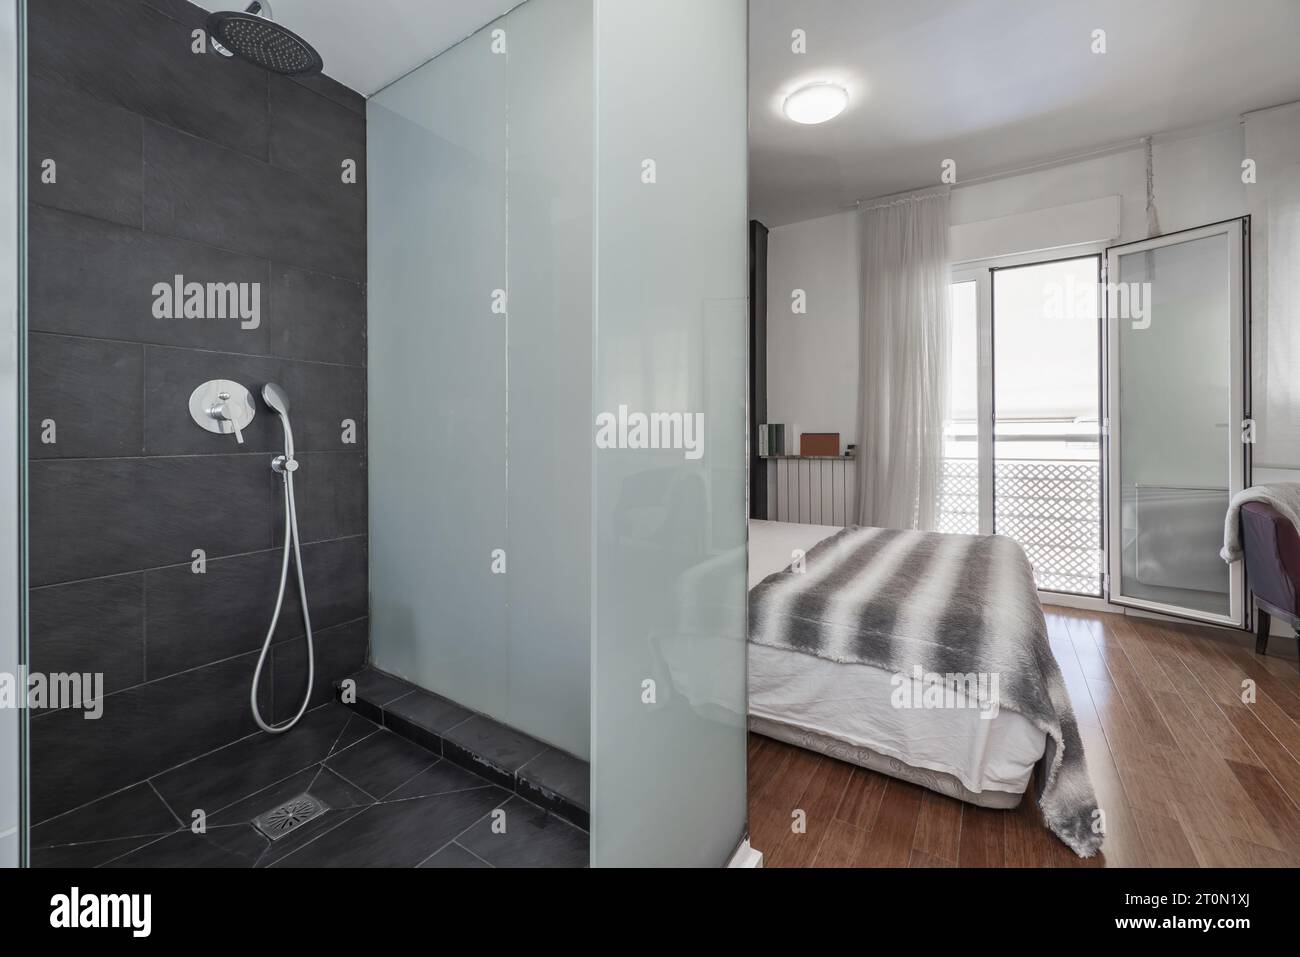 Bathroom with shower cabin with tempered glass next to an en-suite bedroom with a small balcony Stock Photo